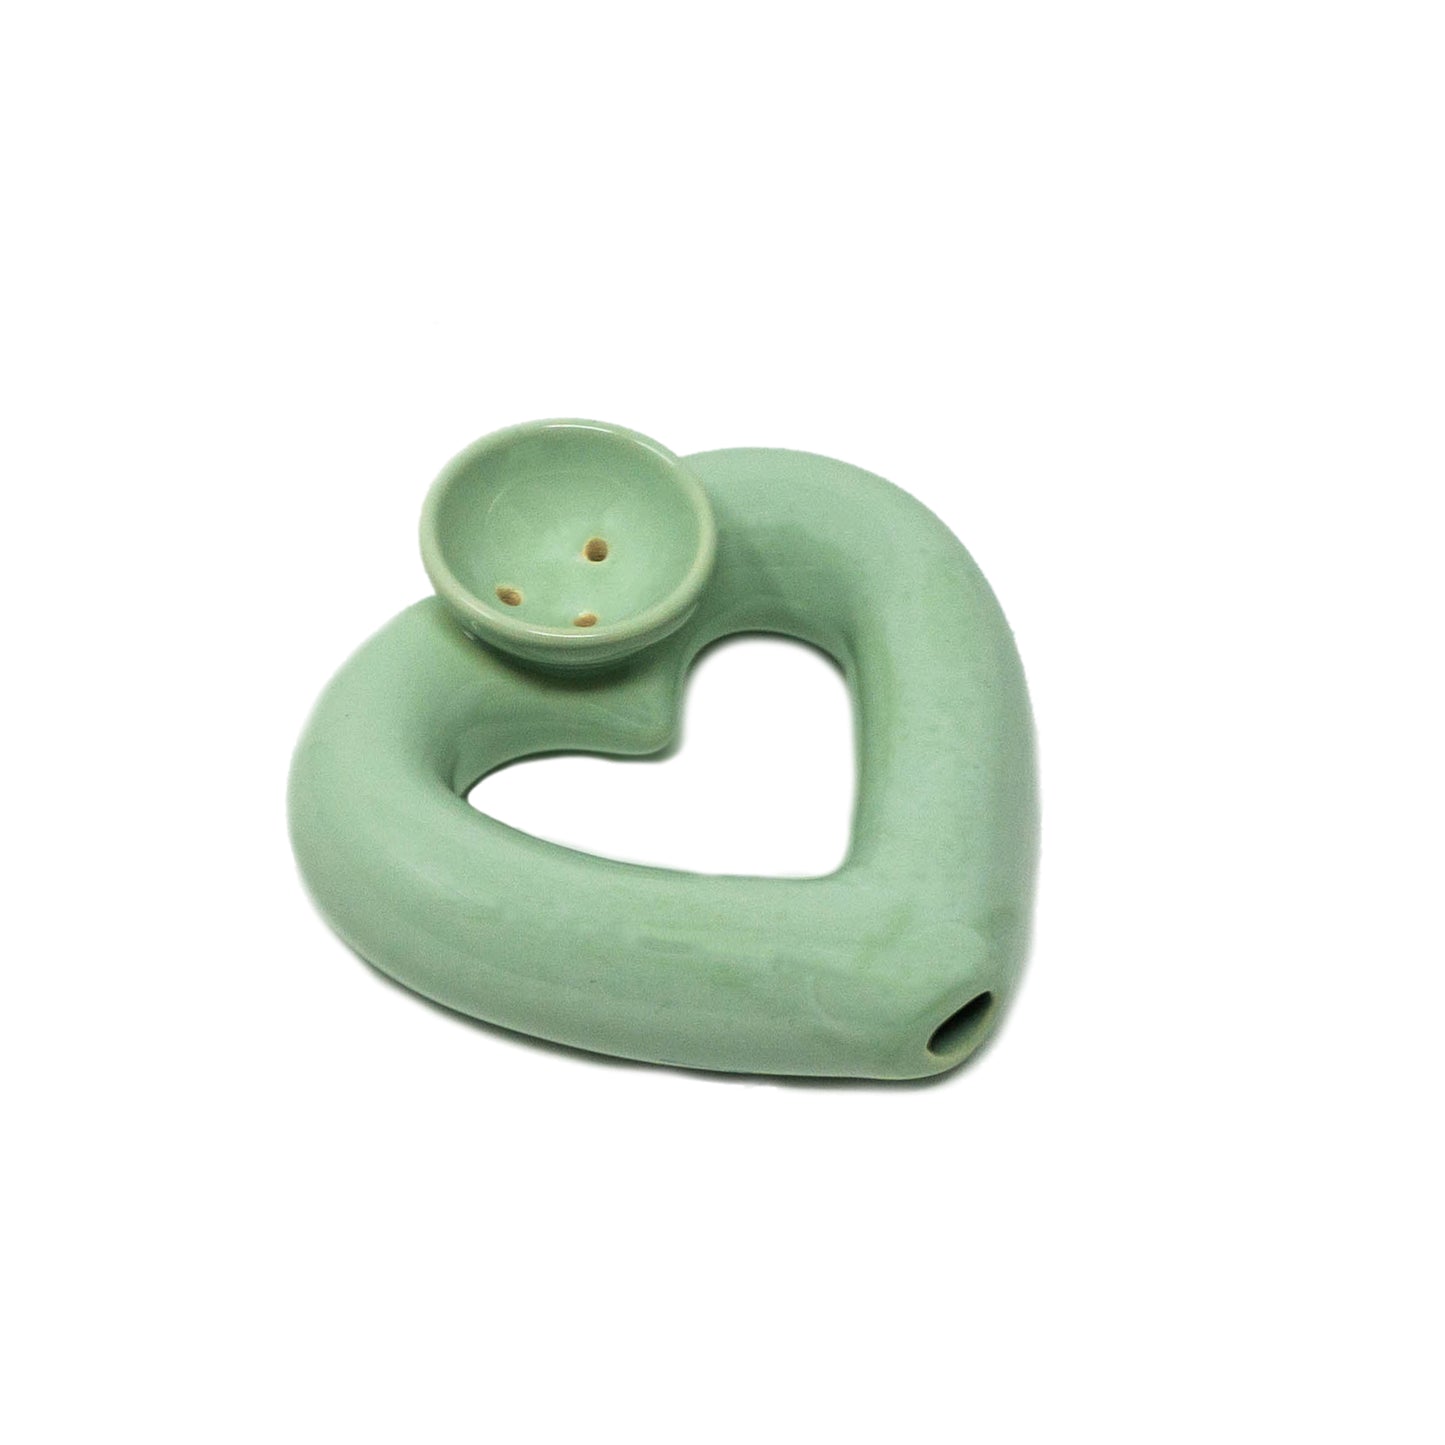 SOFT MINT GREEN BURNING UP 4 UR LOVE HEART TOBACCO PIPE